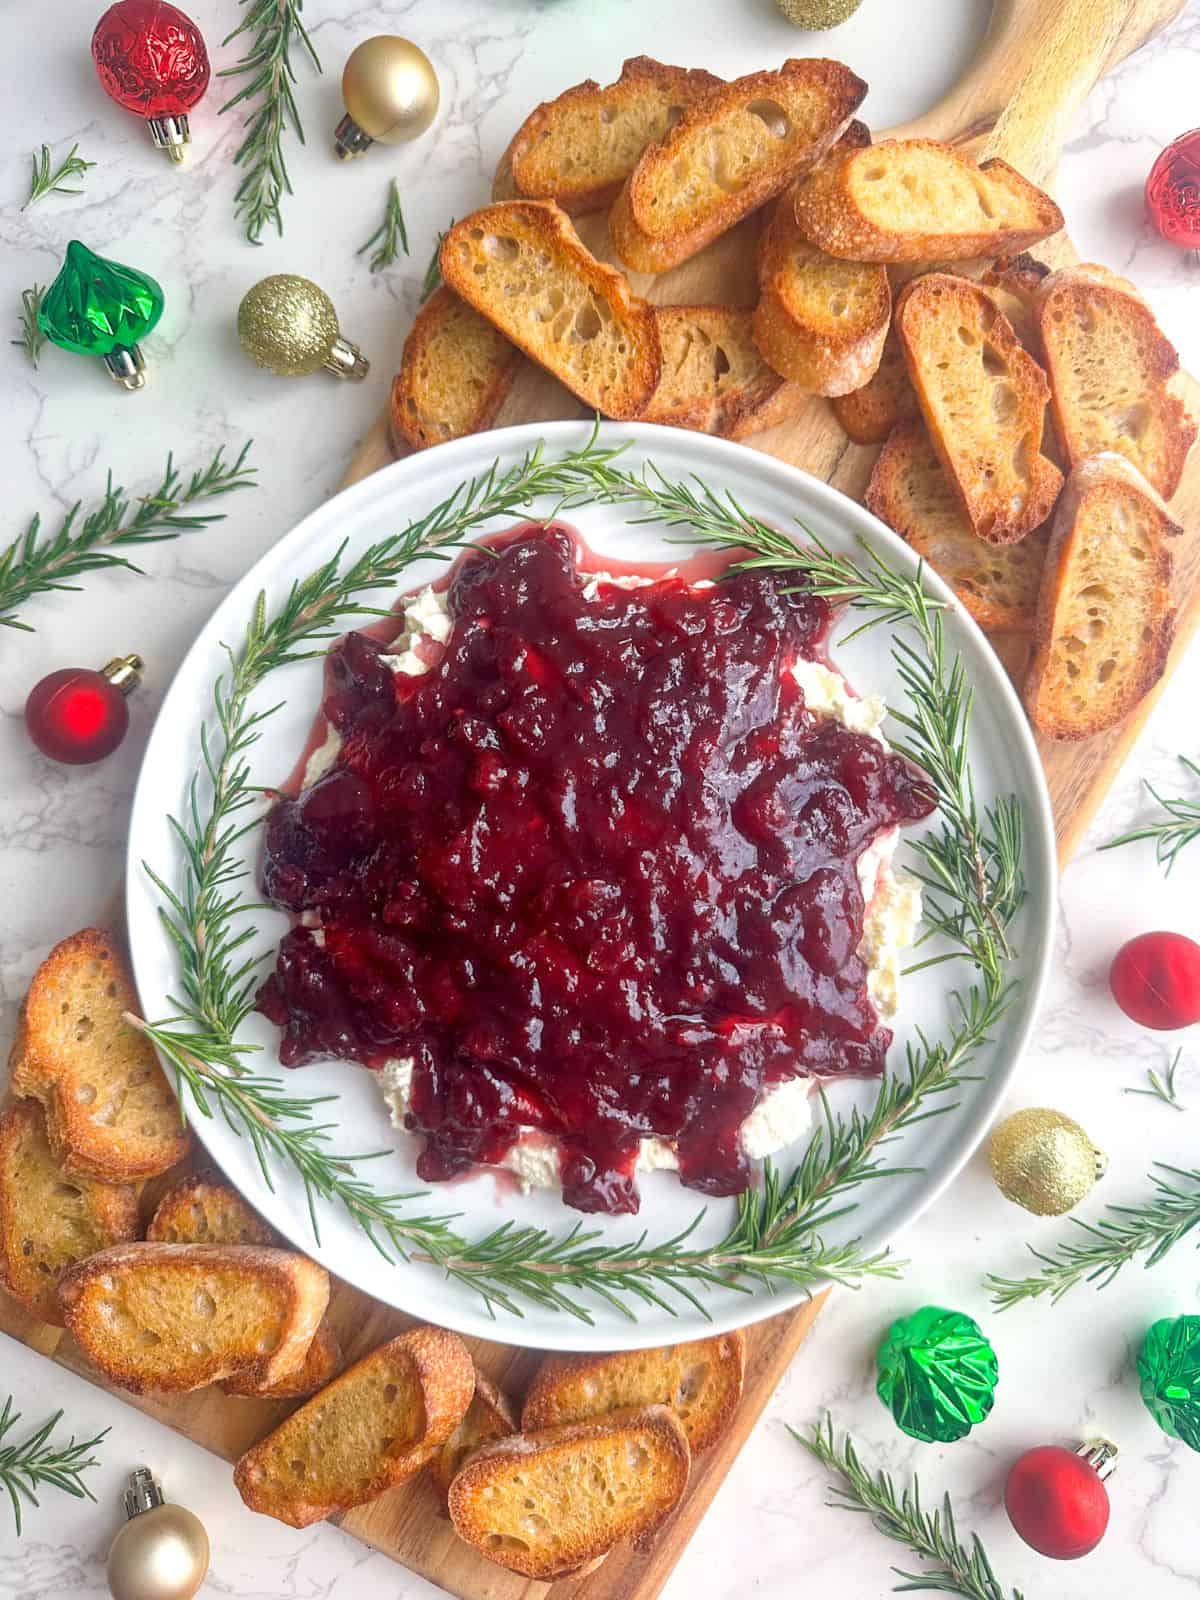 Cranberry feta dip in white bowl with rosemary sprigs, toasted baguette slices, and small Christmas ornaments surrounding them.